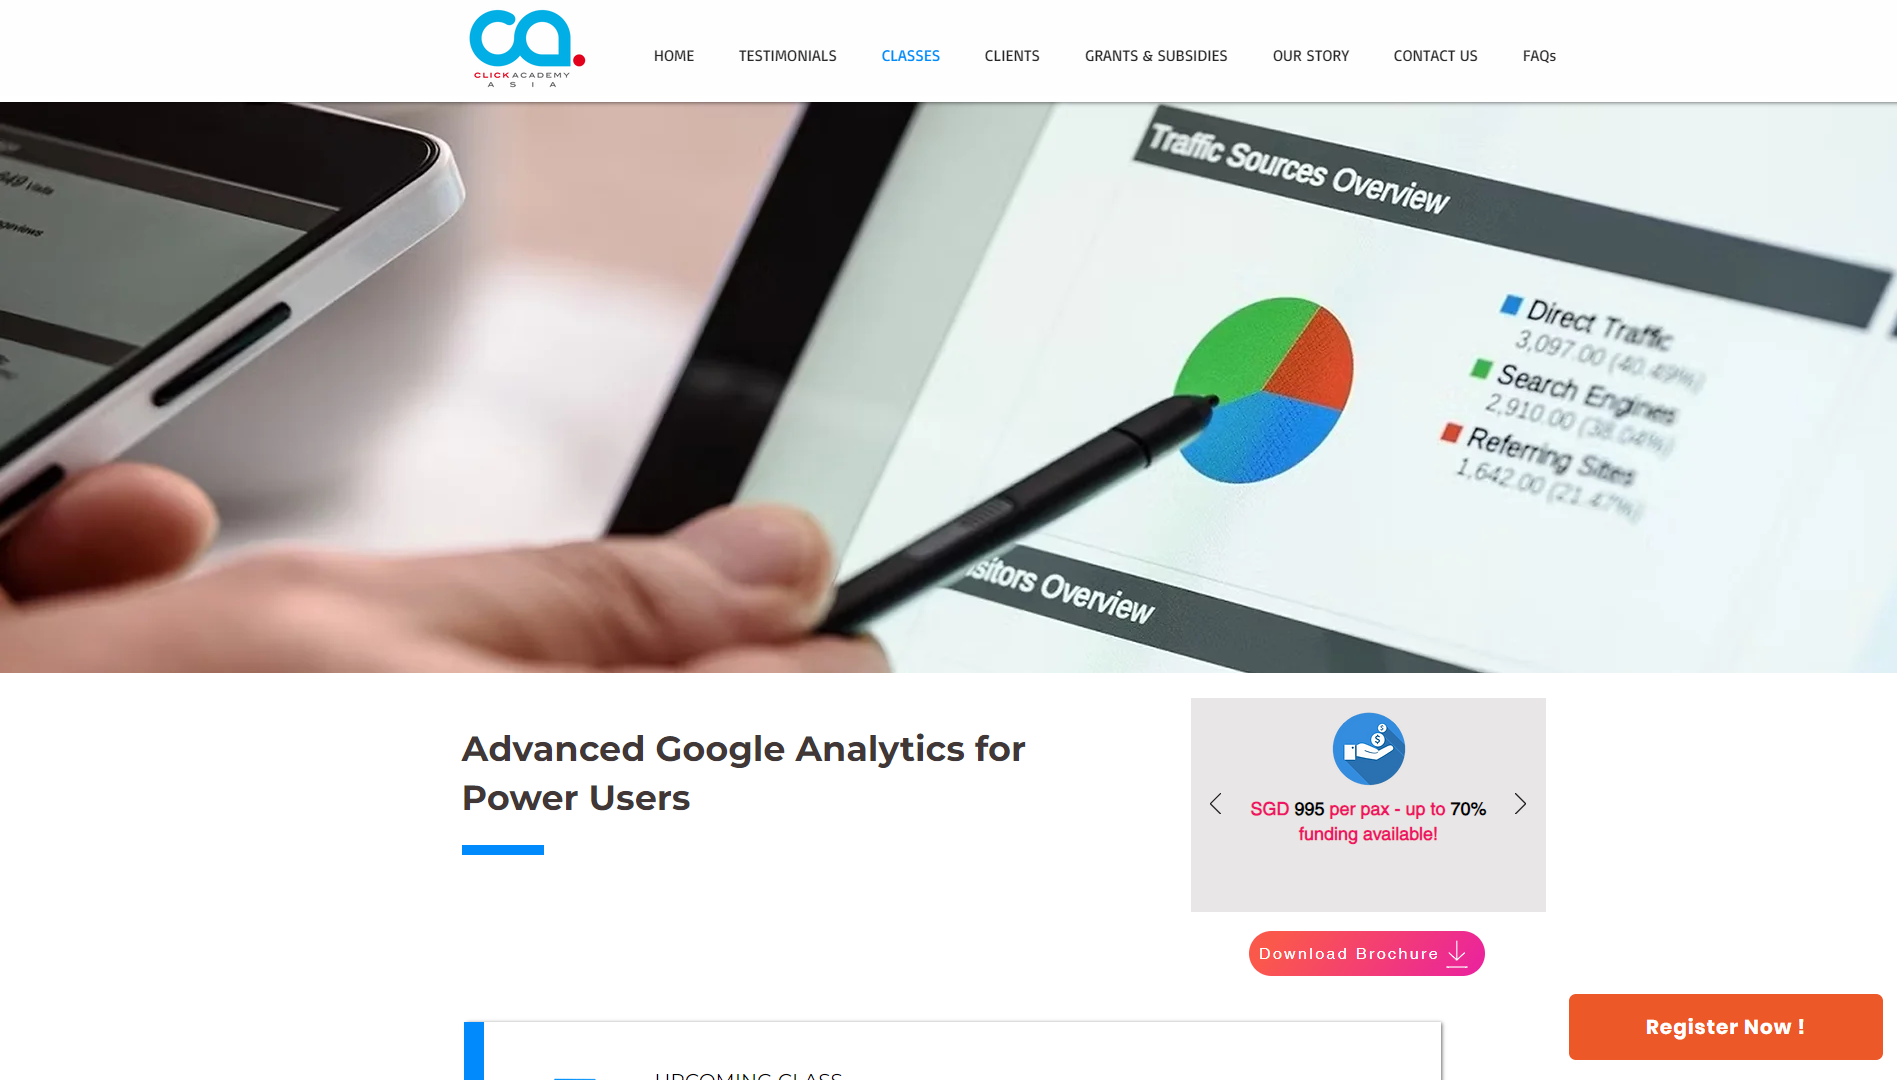 advanced google analytics certification course for power users in singapore